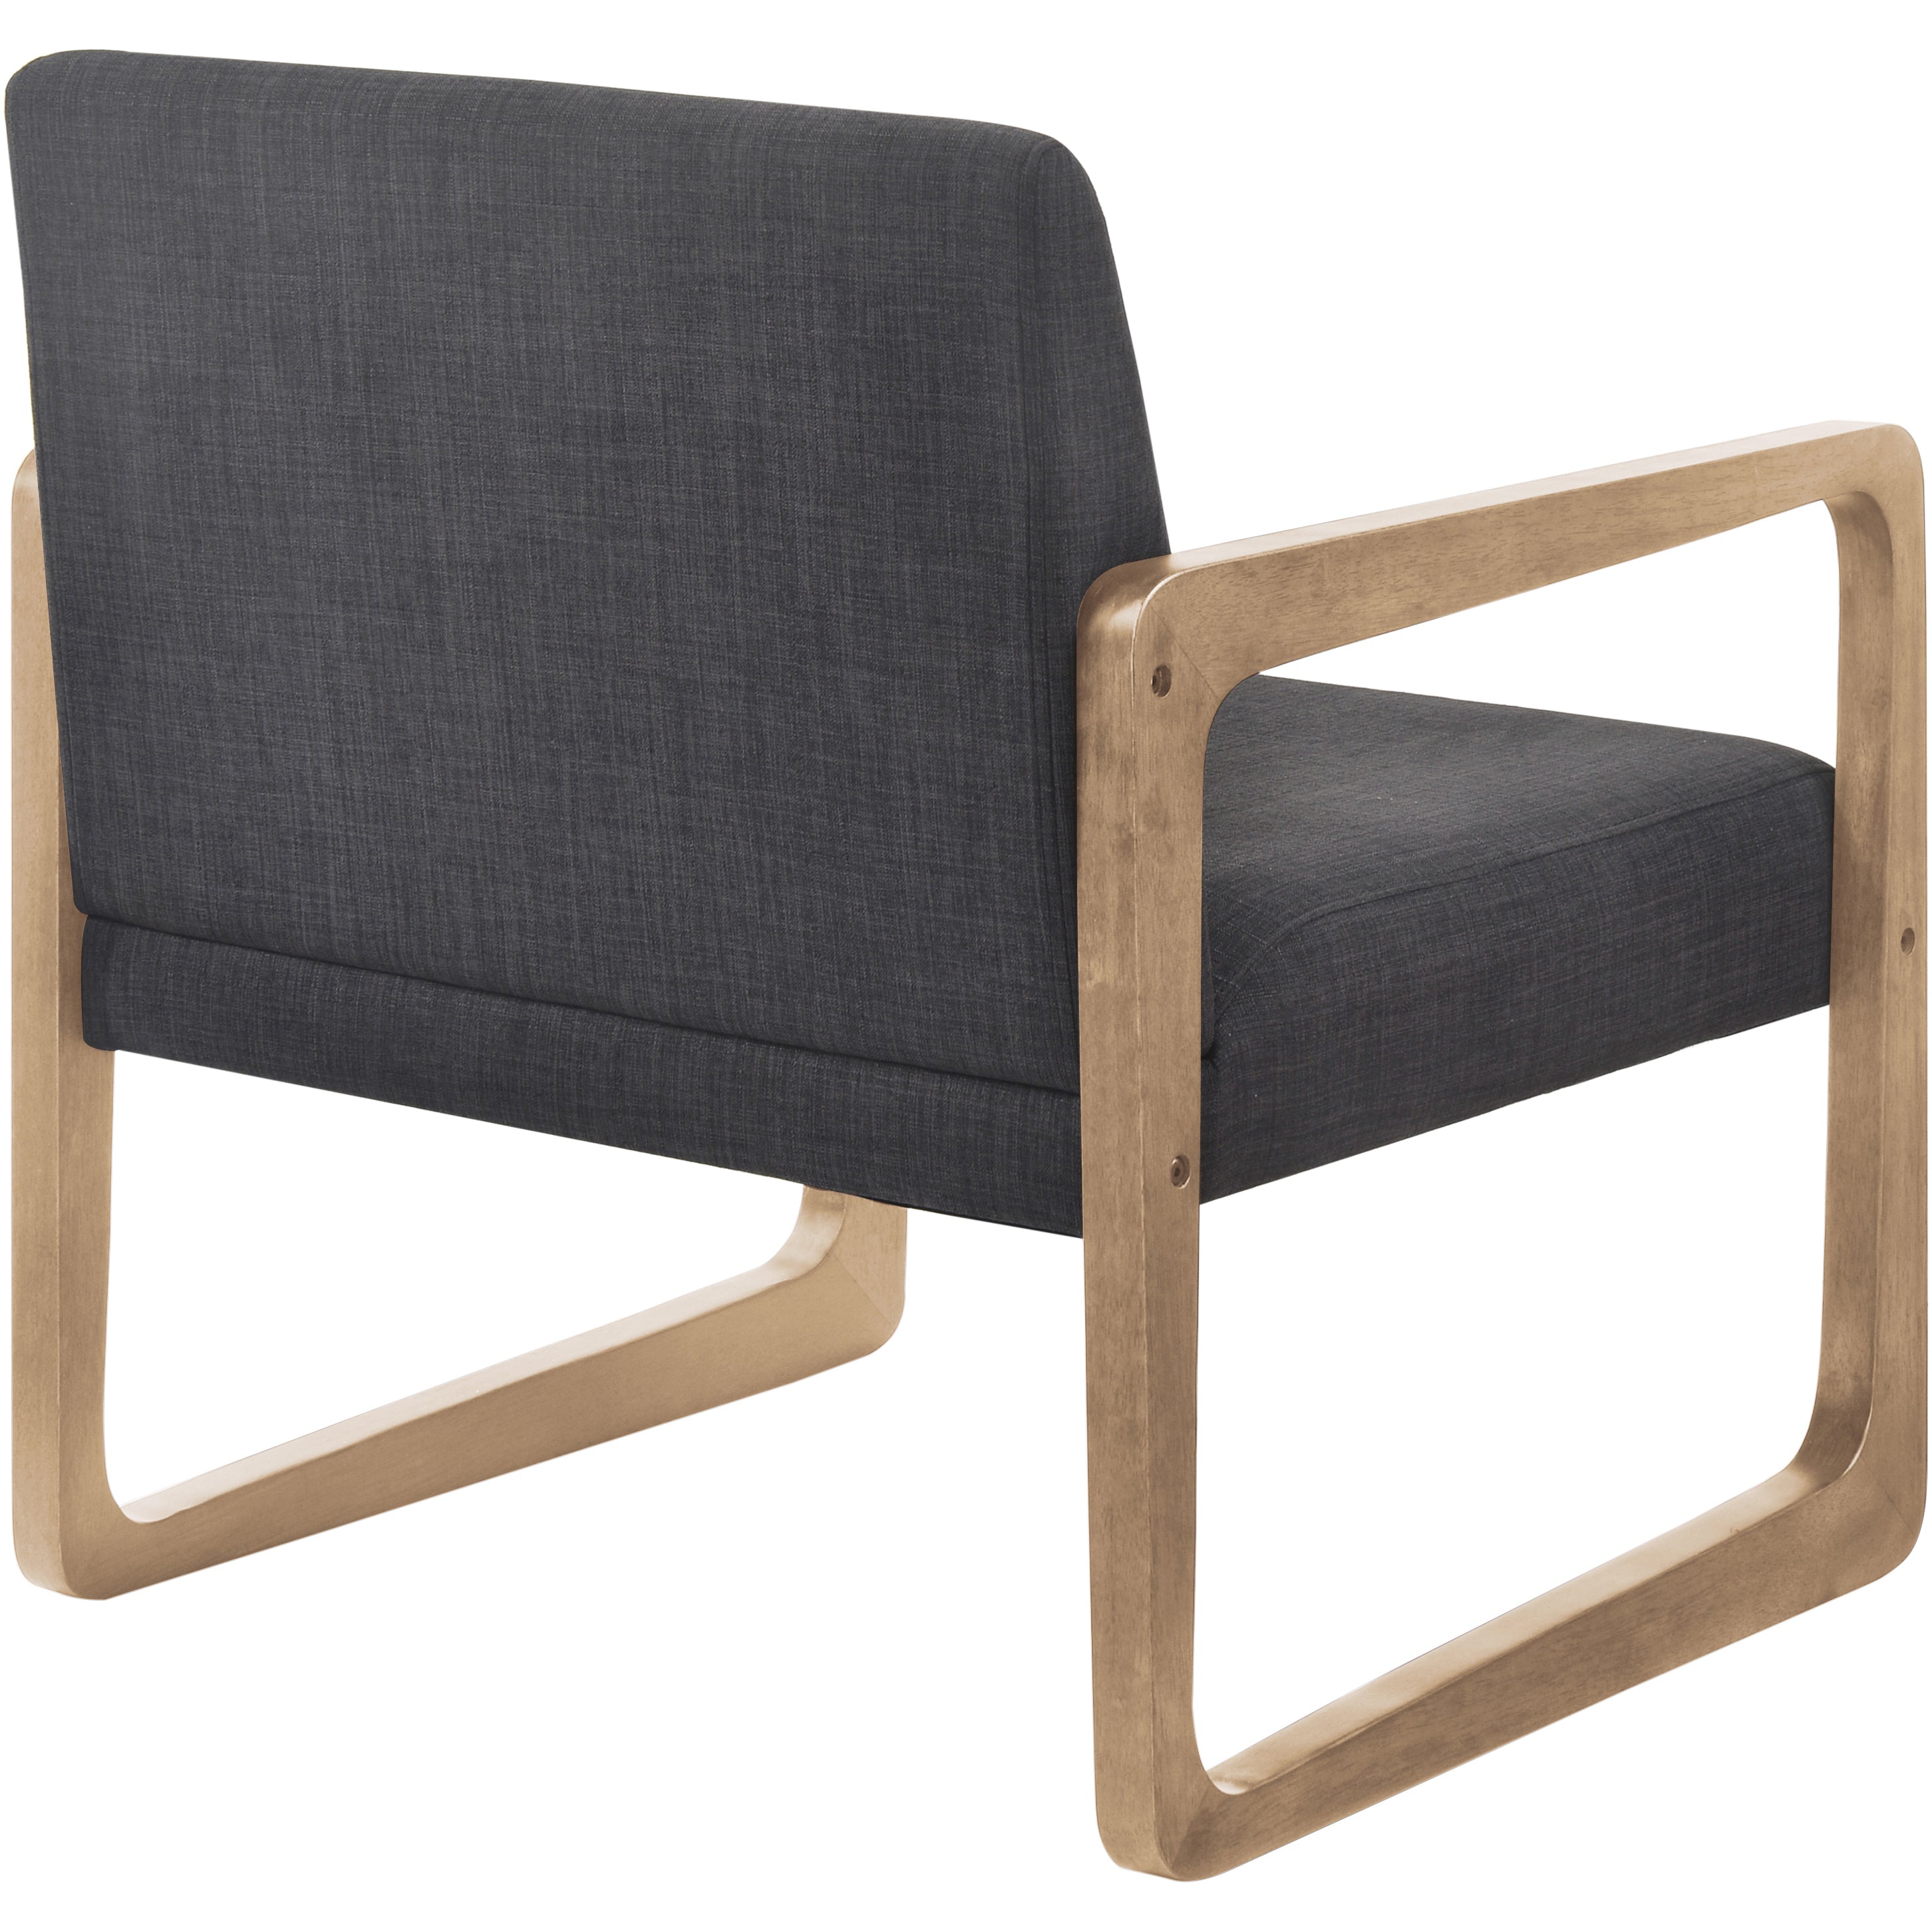 Johnson Accent Lounge Chair - Charcoal/Natural